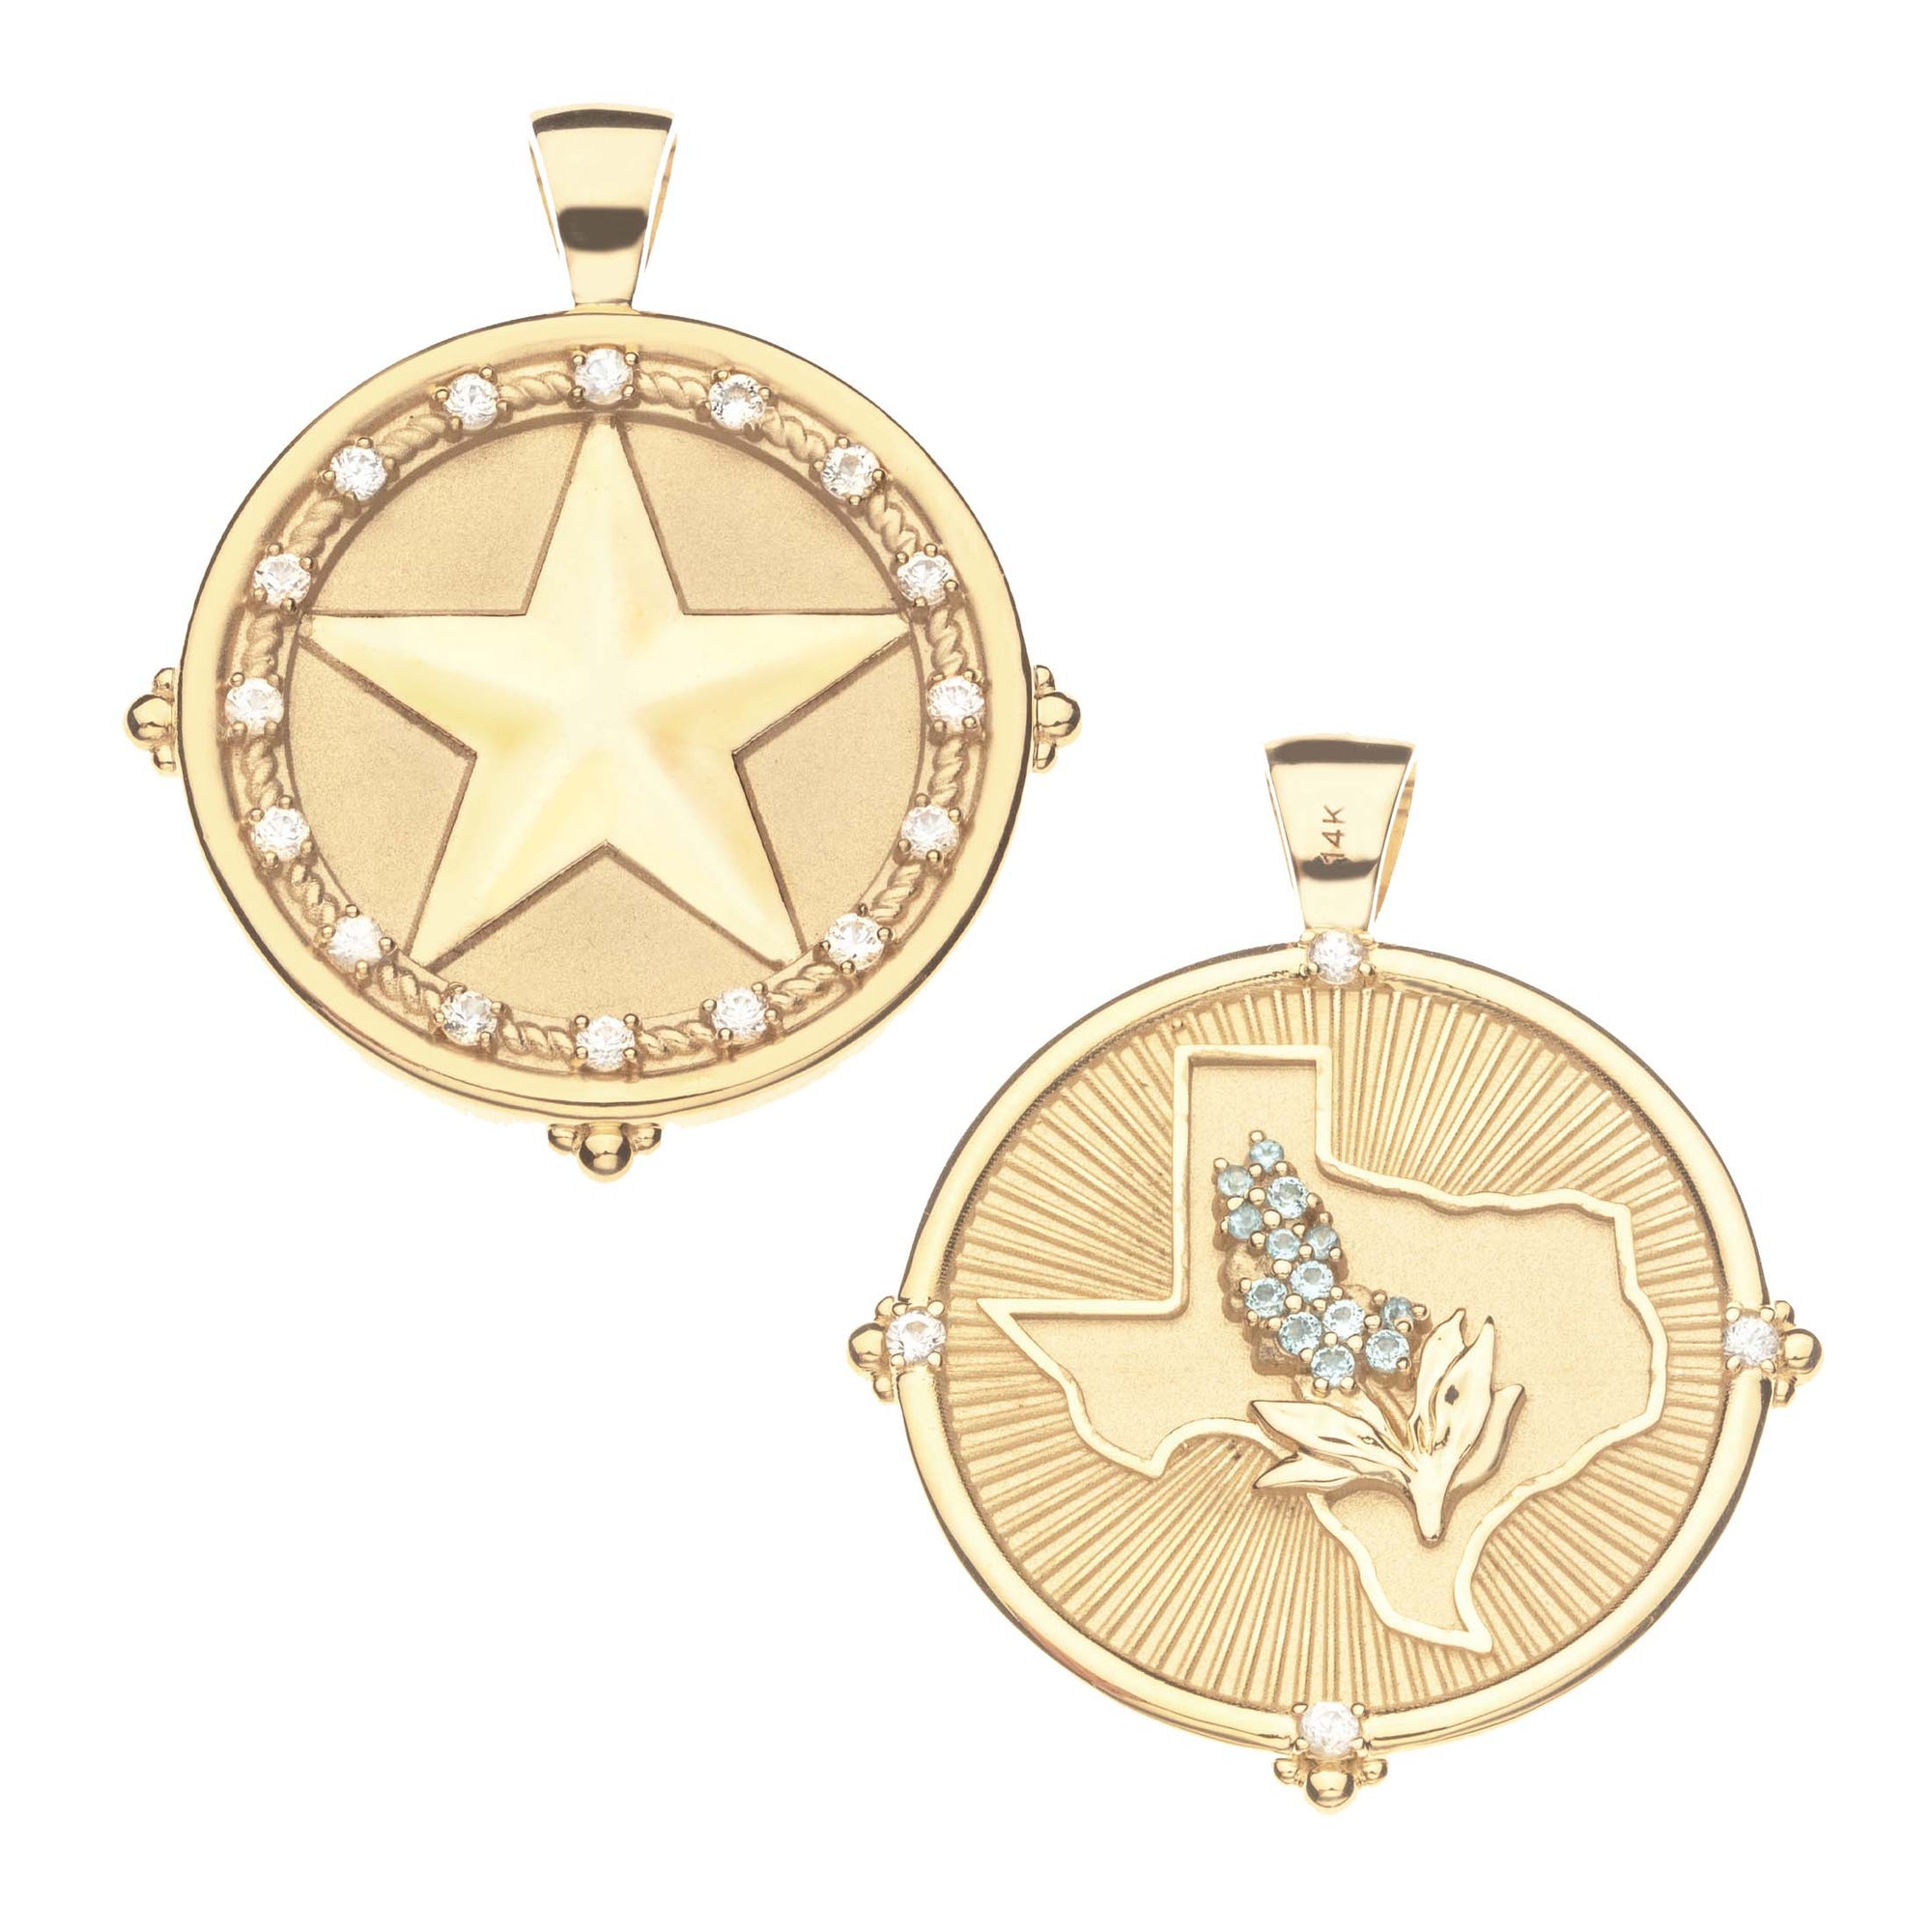 TEXAS JW Original Pendant Coin in 14k Solid Gold with Stones